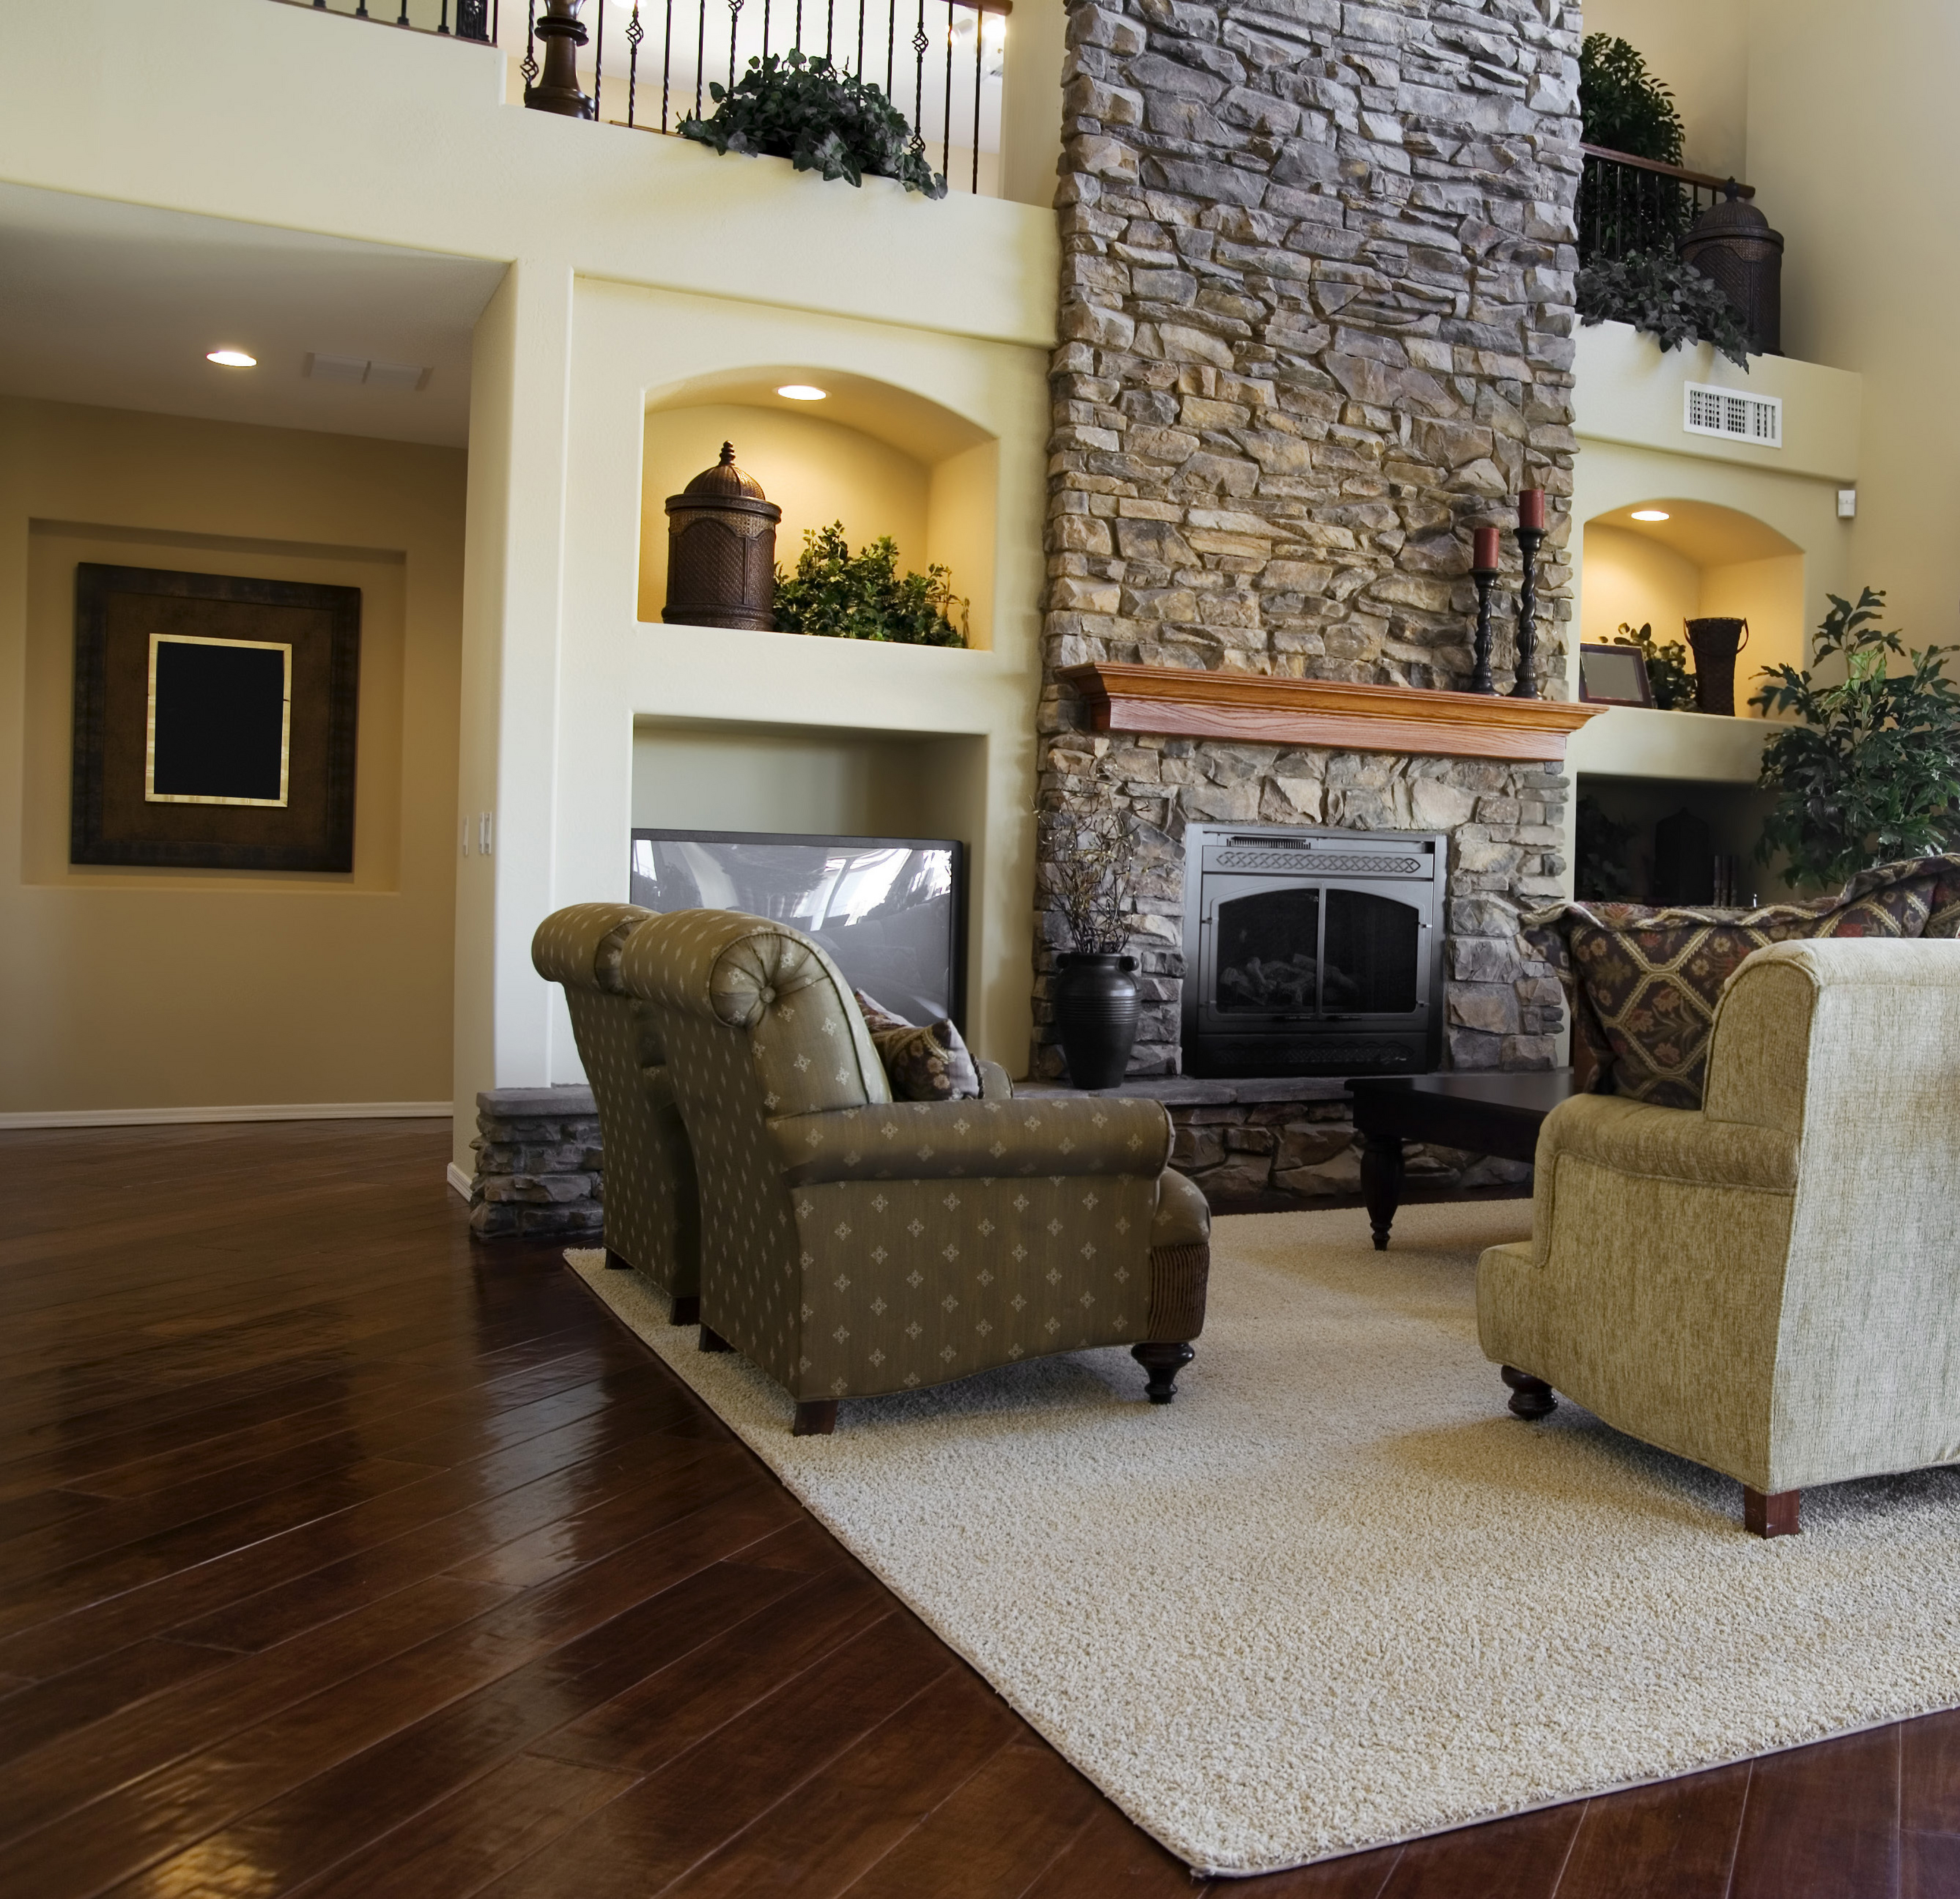 Tips for staging a home